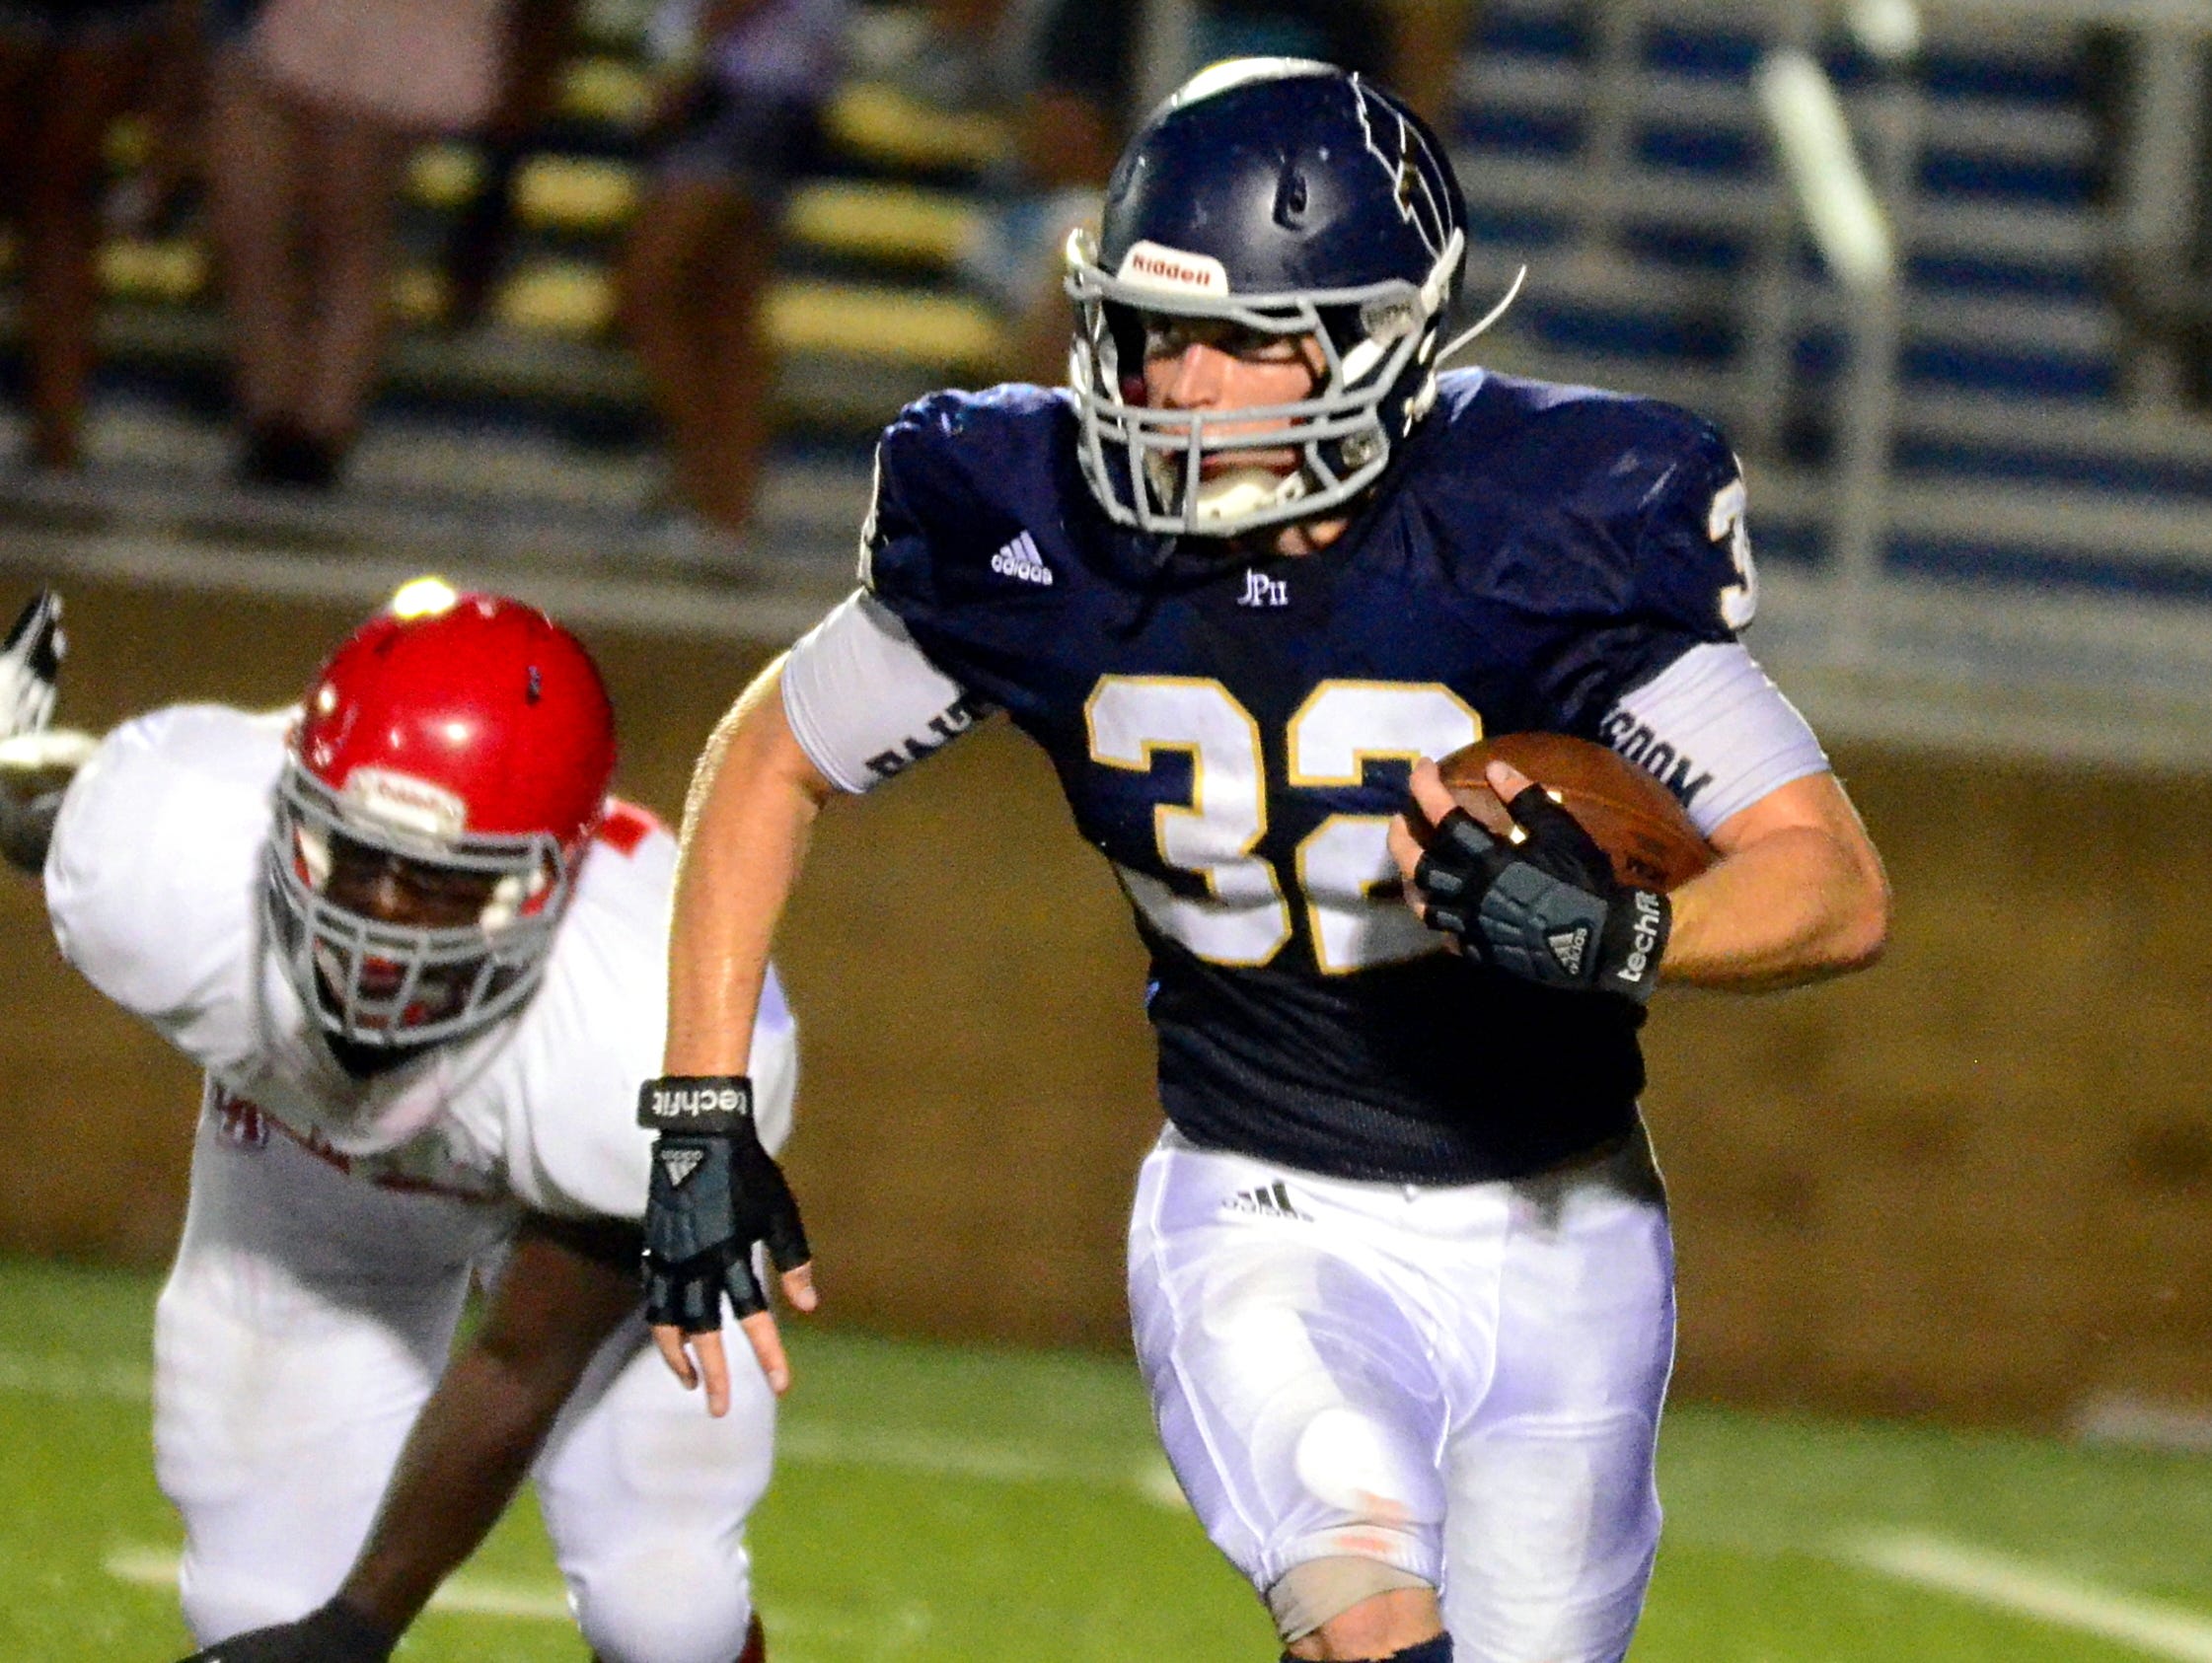 Senior Drew Bledsoe helped Pope John Paul II to a 20-17 win at Father Ryan on Friday.